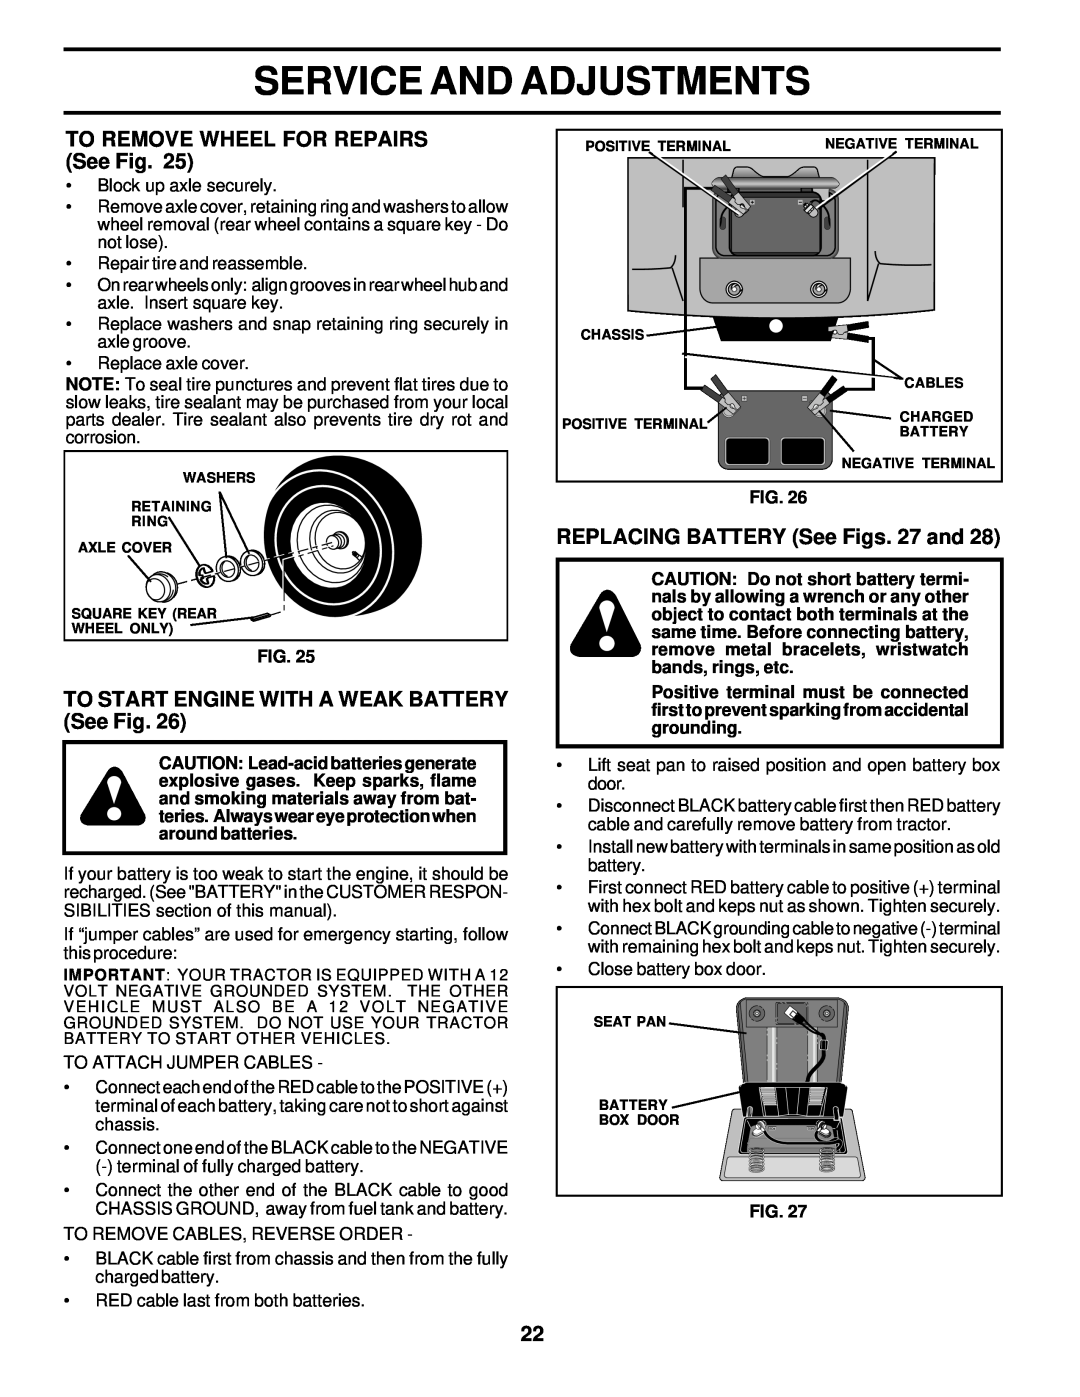 Weed Eater 177019 manual TO REMOVE WHEEL FOR REPAIRS See Fig, TO START ENGINE WITH A WEAK BATTERY See Fig 